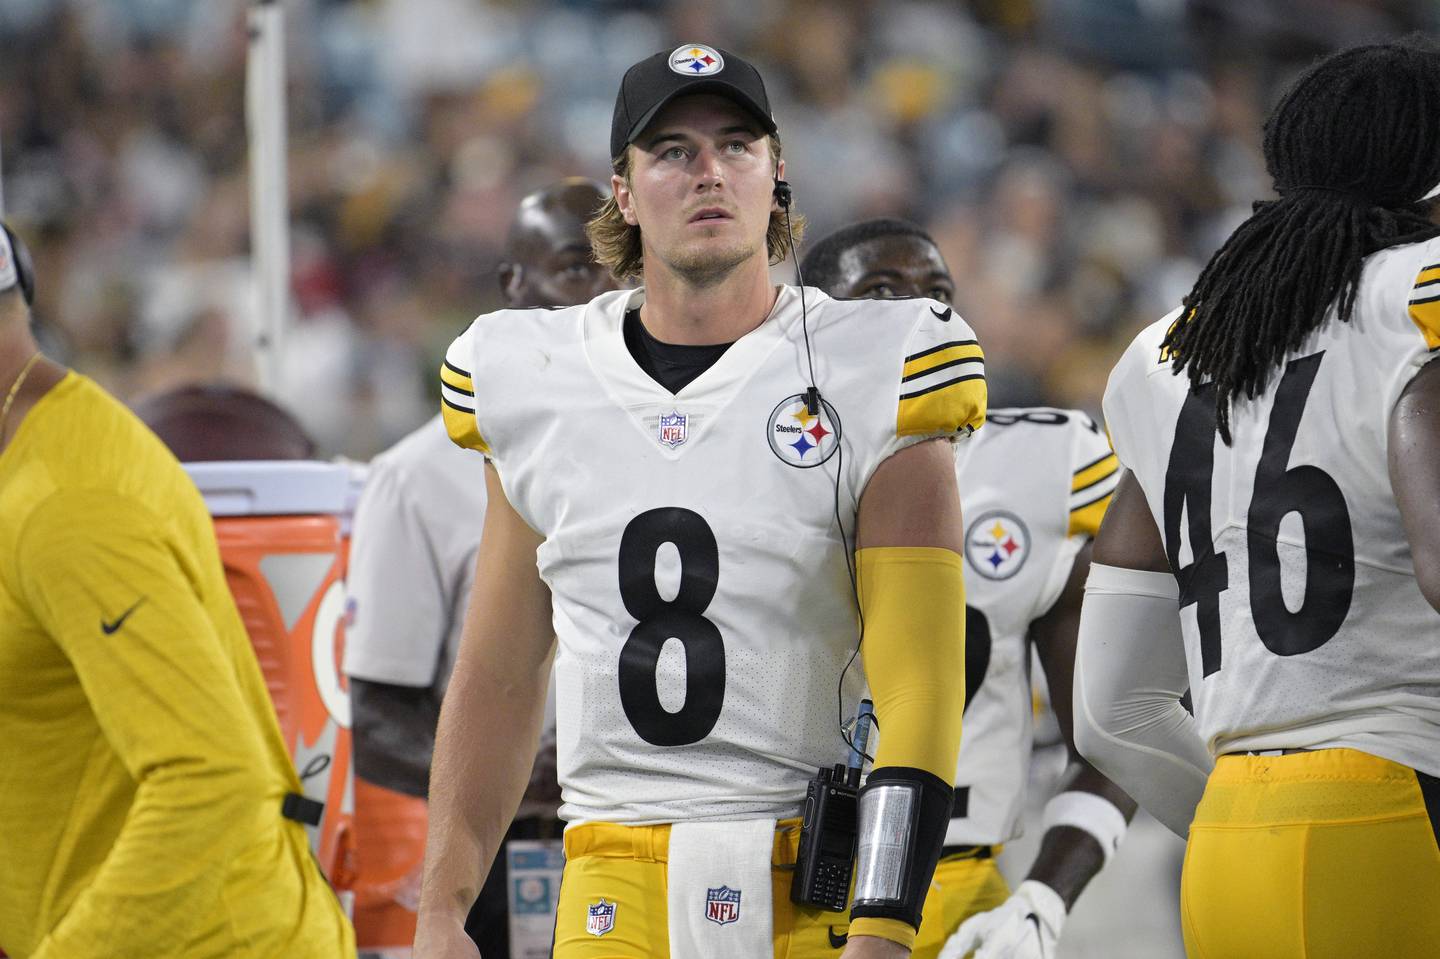 Pittsburgh Steelers quarterback Kenny Pickett (8) watches from the sideline during the second half of a preseason NFL football game against the Jacksonville Jaguars, Saturday, Aug. 20, 2022, in Jacksonville, Fla. (AP Photo/Phelan M. Ebenhack)